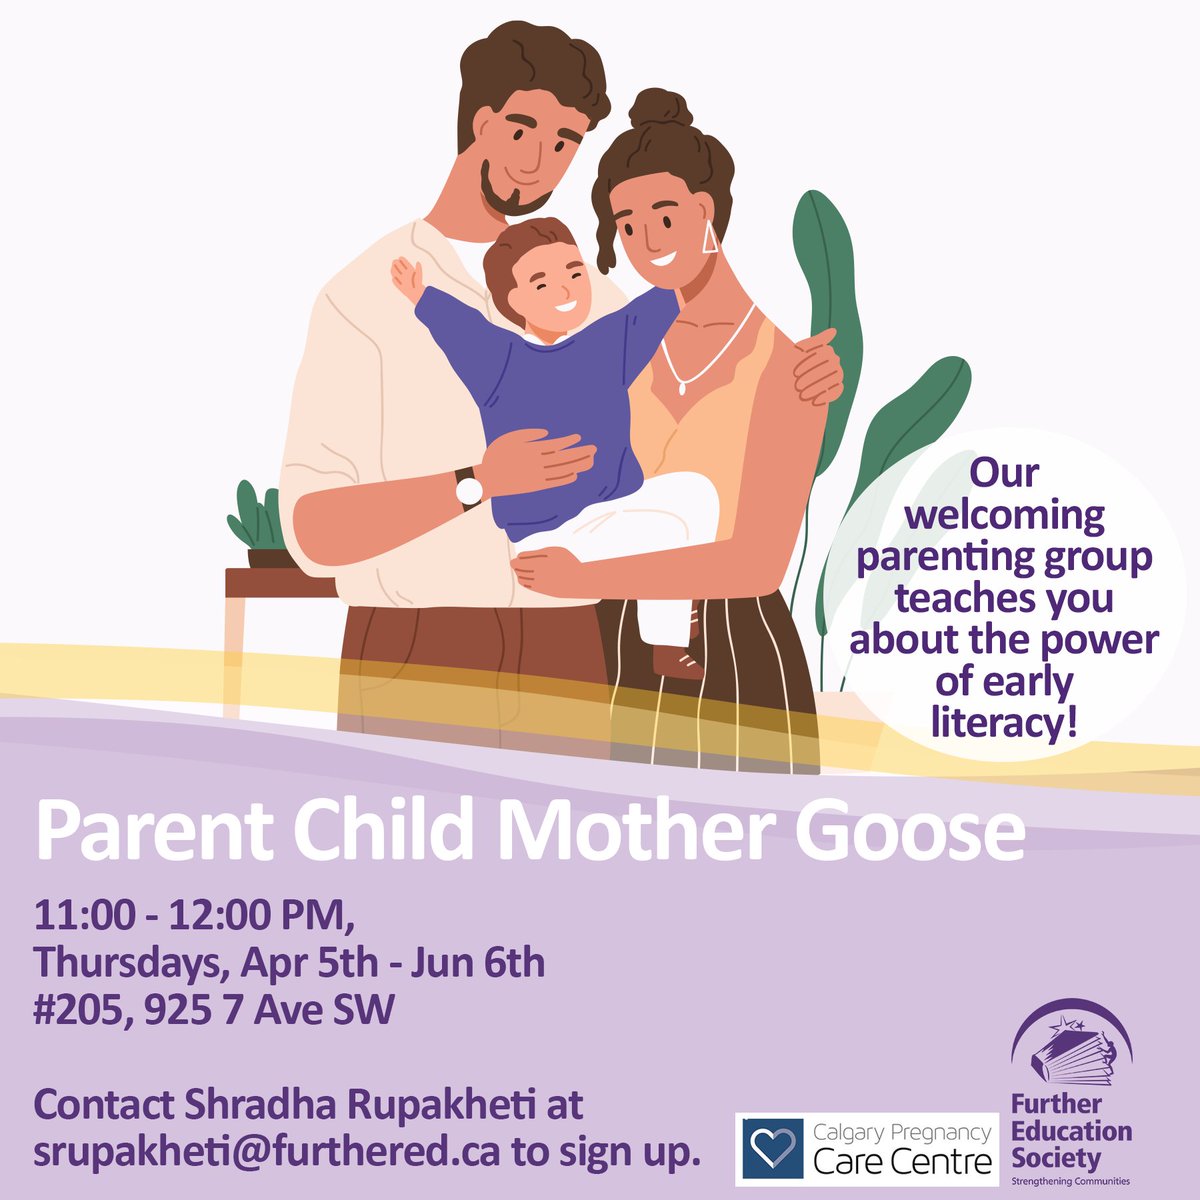 Join us Thursdays at the @pregcare for a FREE PCMG program! Learn alongside other parents and discover the power of early literacy!  

#yyc #calgary #parentingprogram #parentinggroup #familylearning #reading #singalong #storytime #parents #babies #toddlers